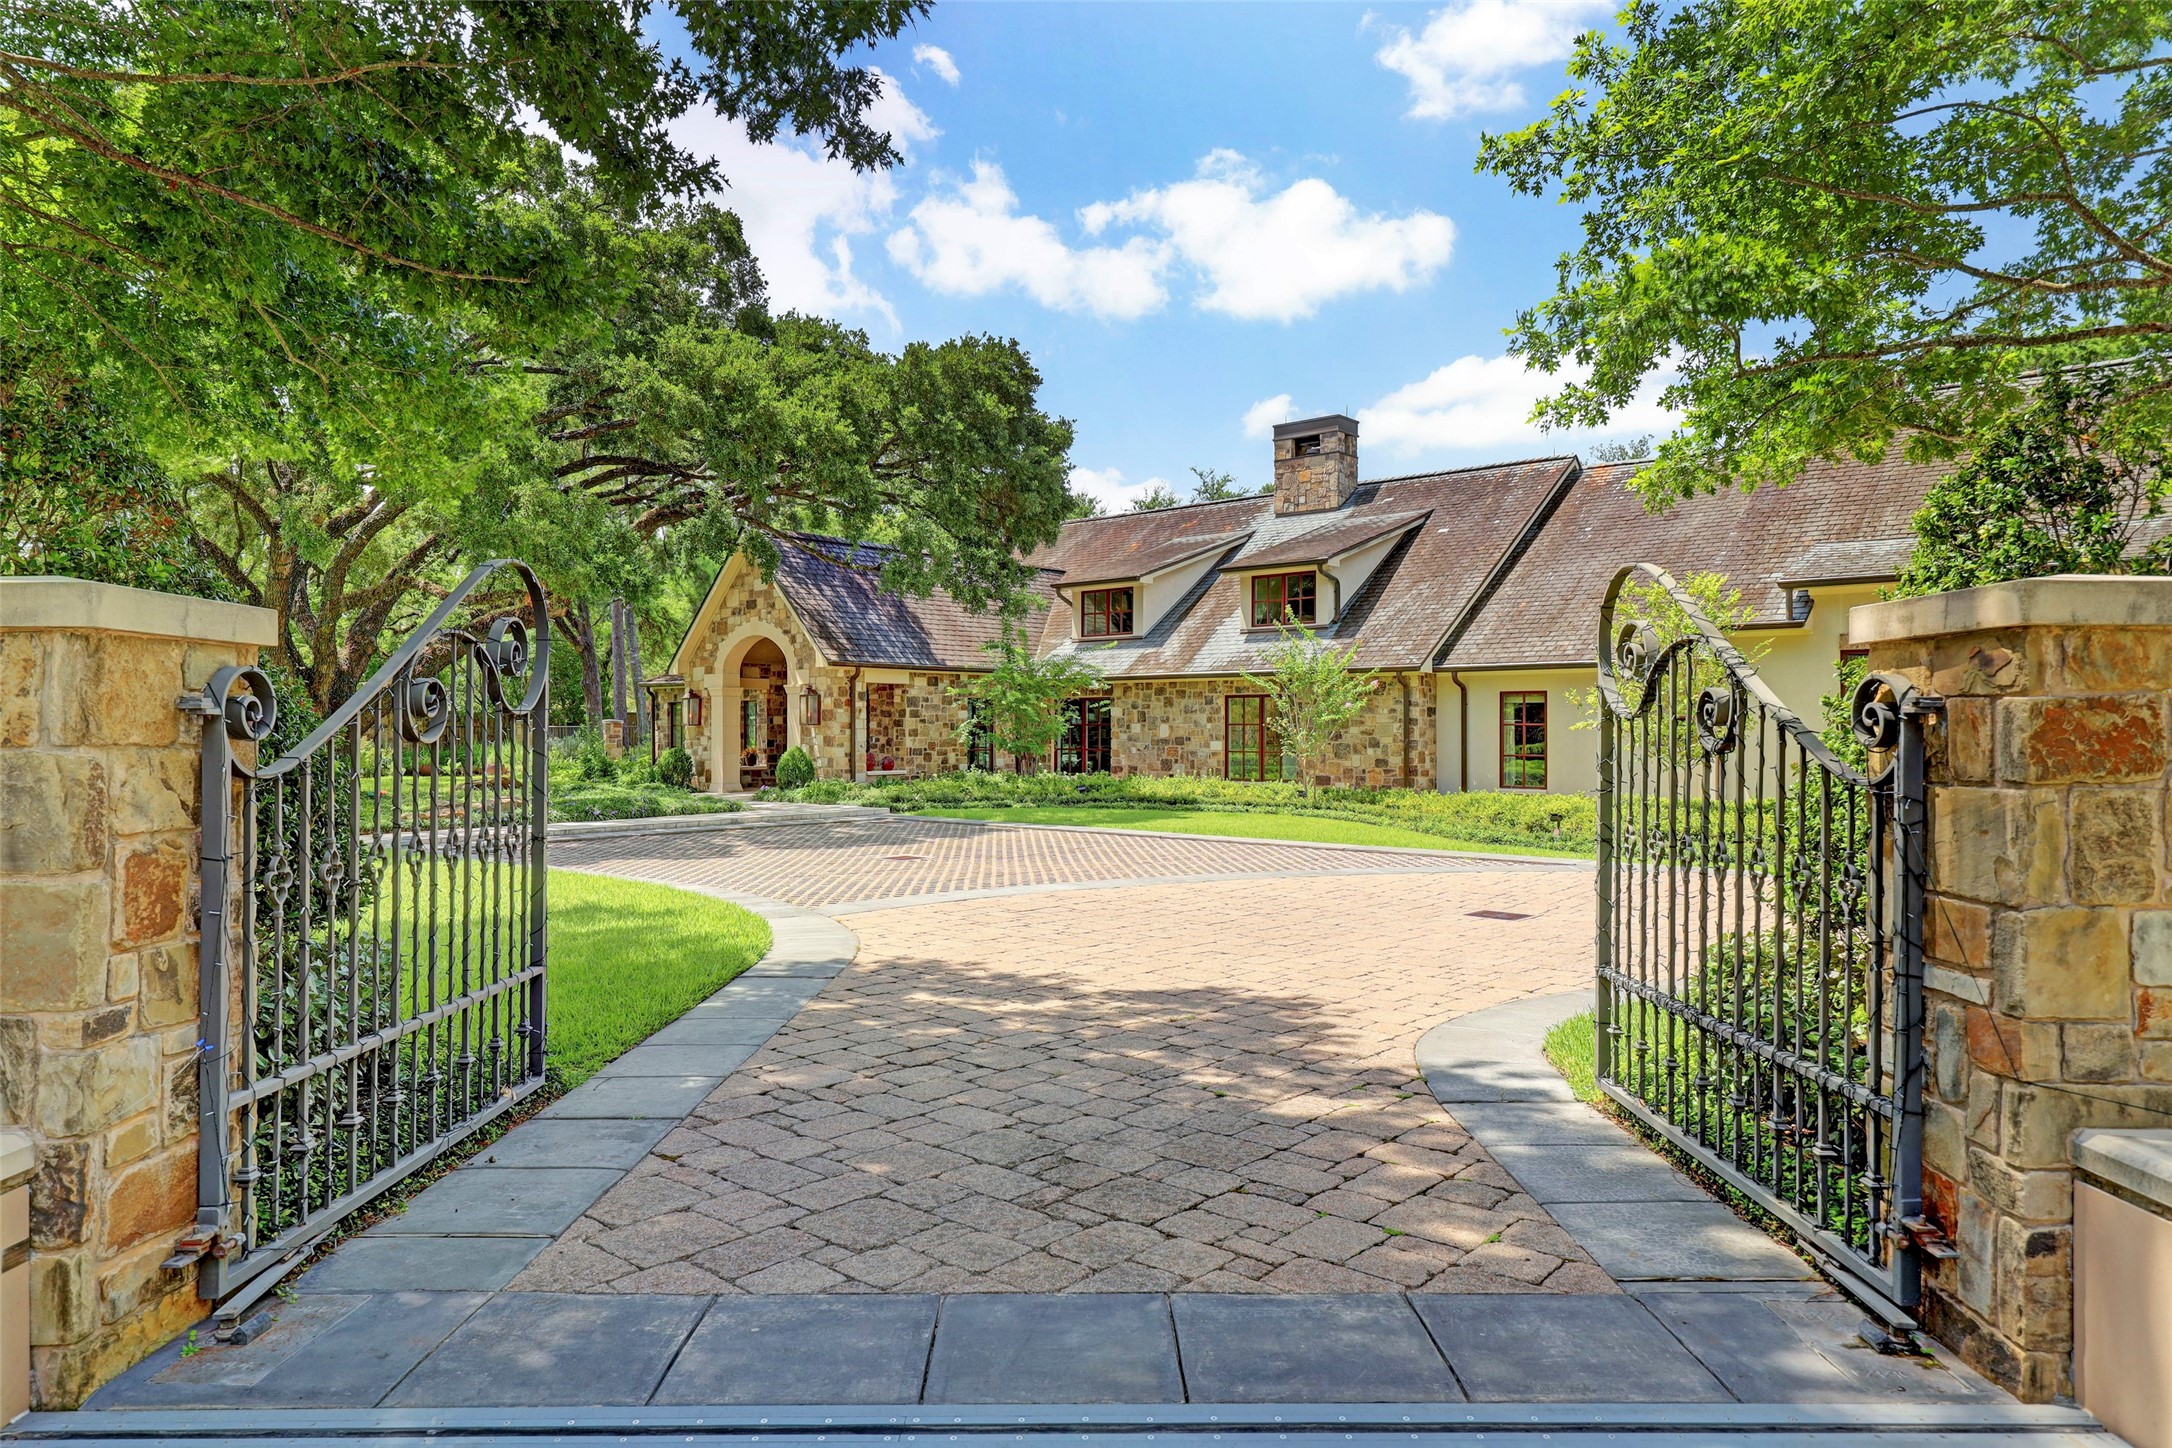 Gated entry to the property!